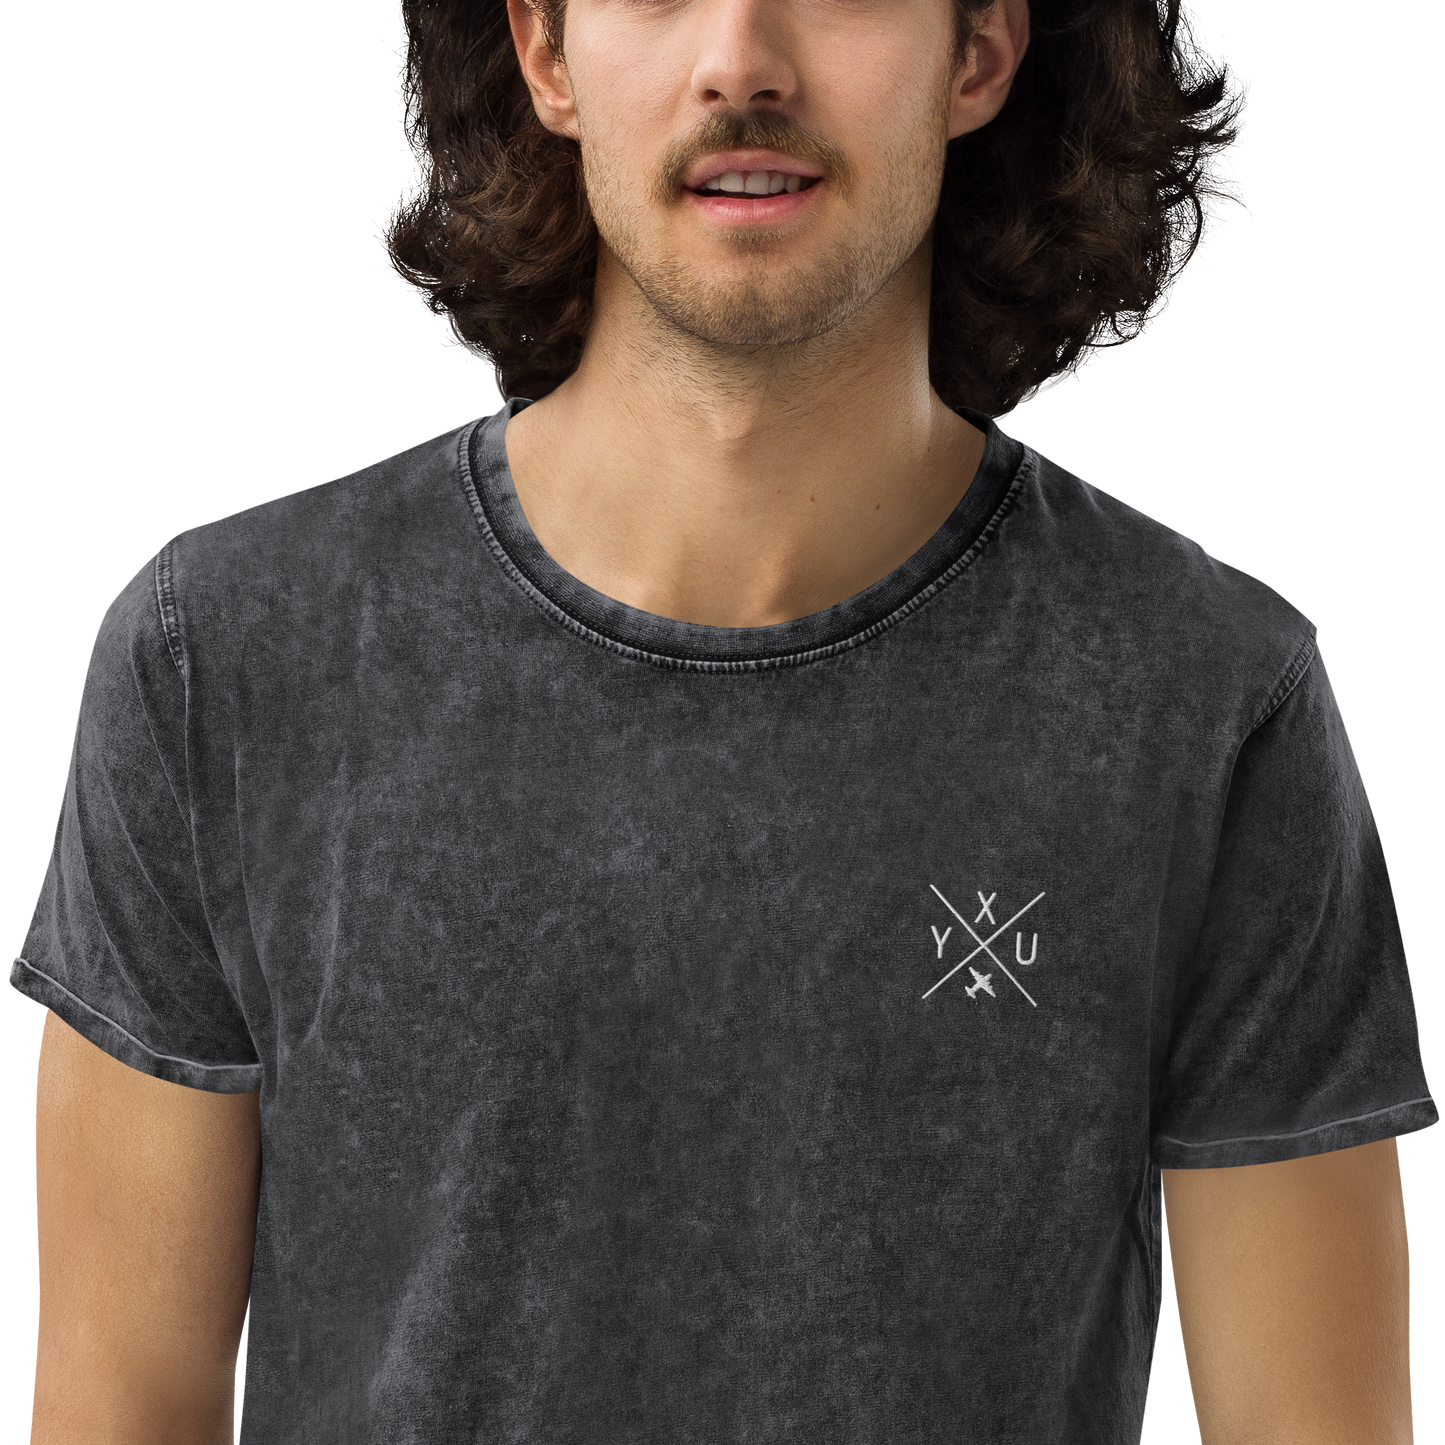 YHM Designs - YXU London Denim T-Shirt - Crossed-X Design with Airport Code and Vintage Propliner - White Embroidery - Image 07